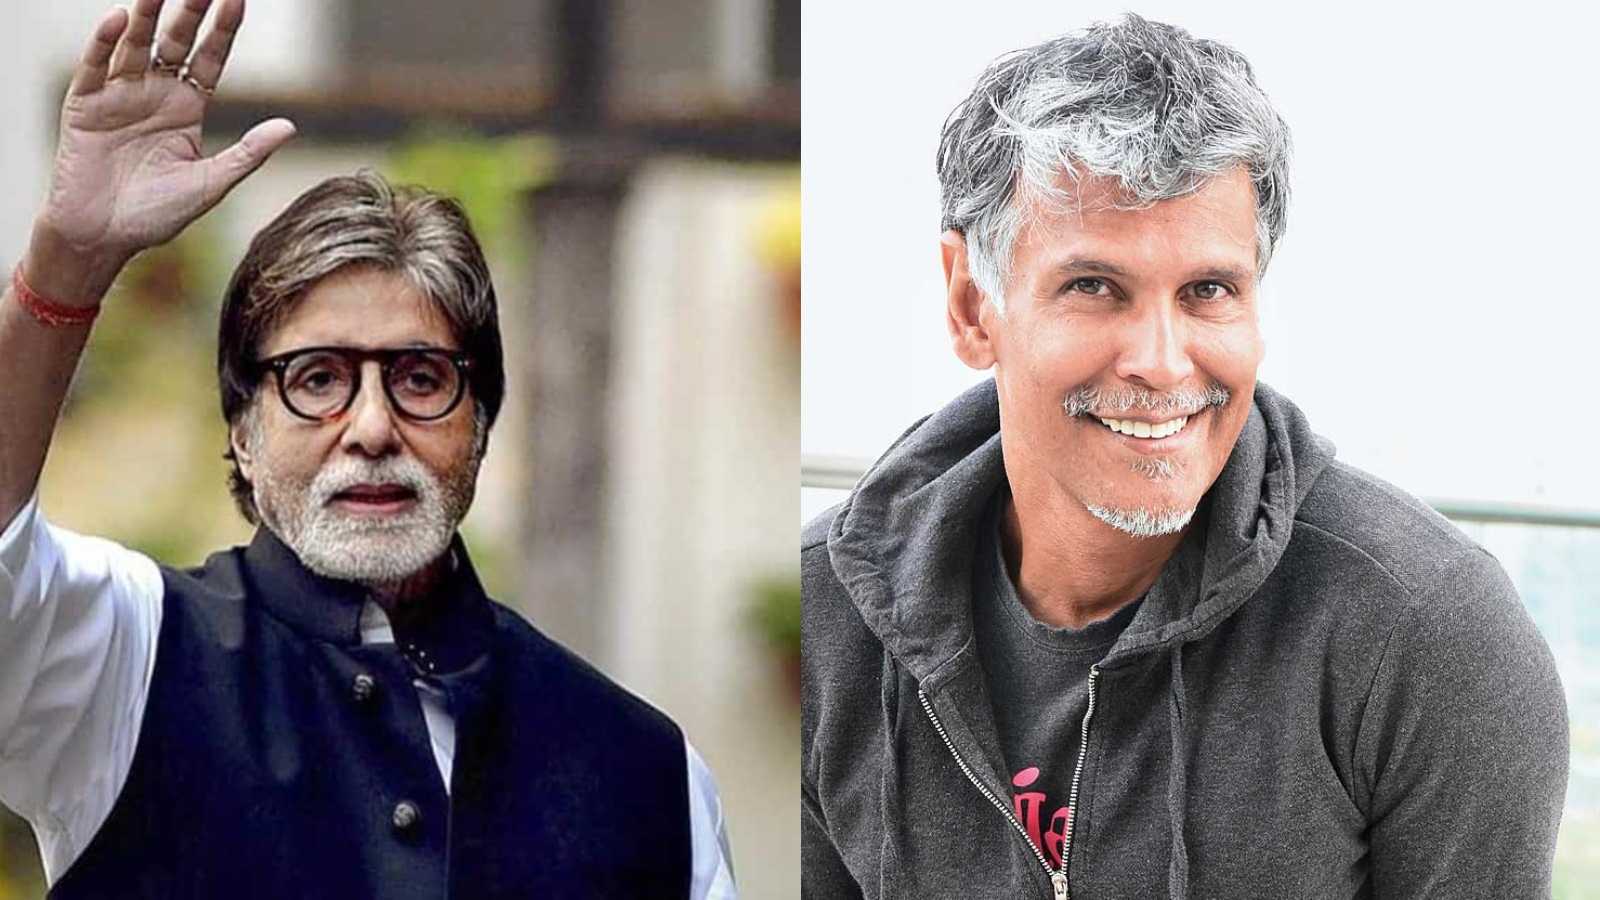 Amitabh Bachchan fandom greets Milind Soman in Egypt as soon as he lands: 'First thing I hear from security ..'